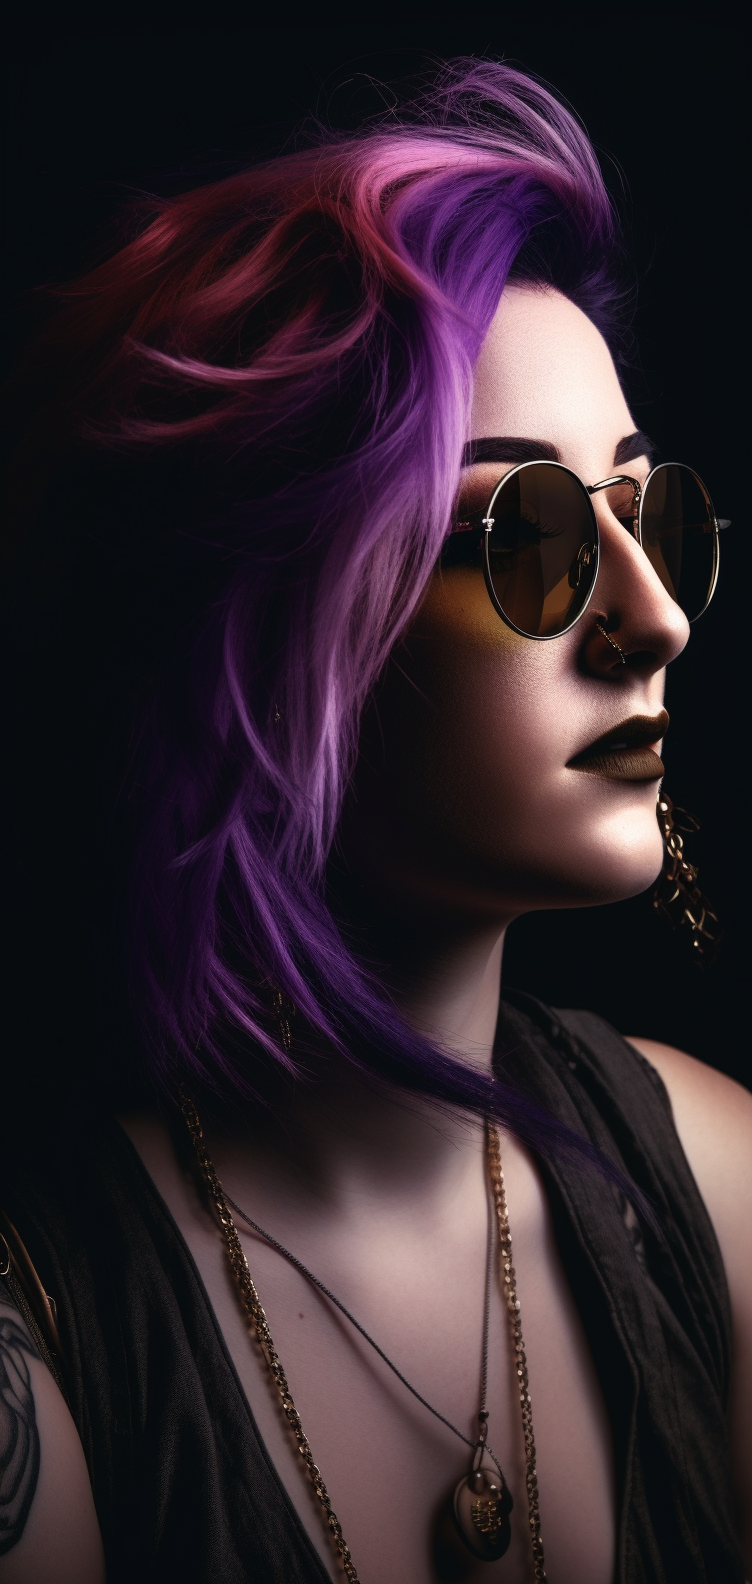 Jen_Palmer_a_woman_with_purple_hair_bracelets_and_sunglasses_in_186bdcf5-5026-4609-a8c3-b348af74a3d4.png